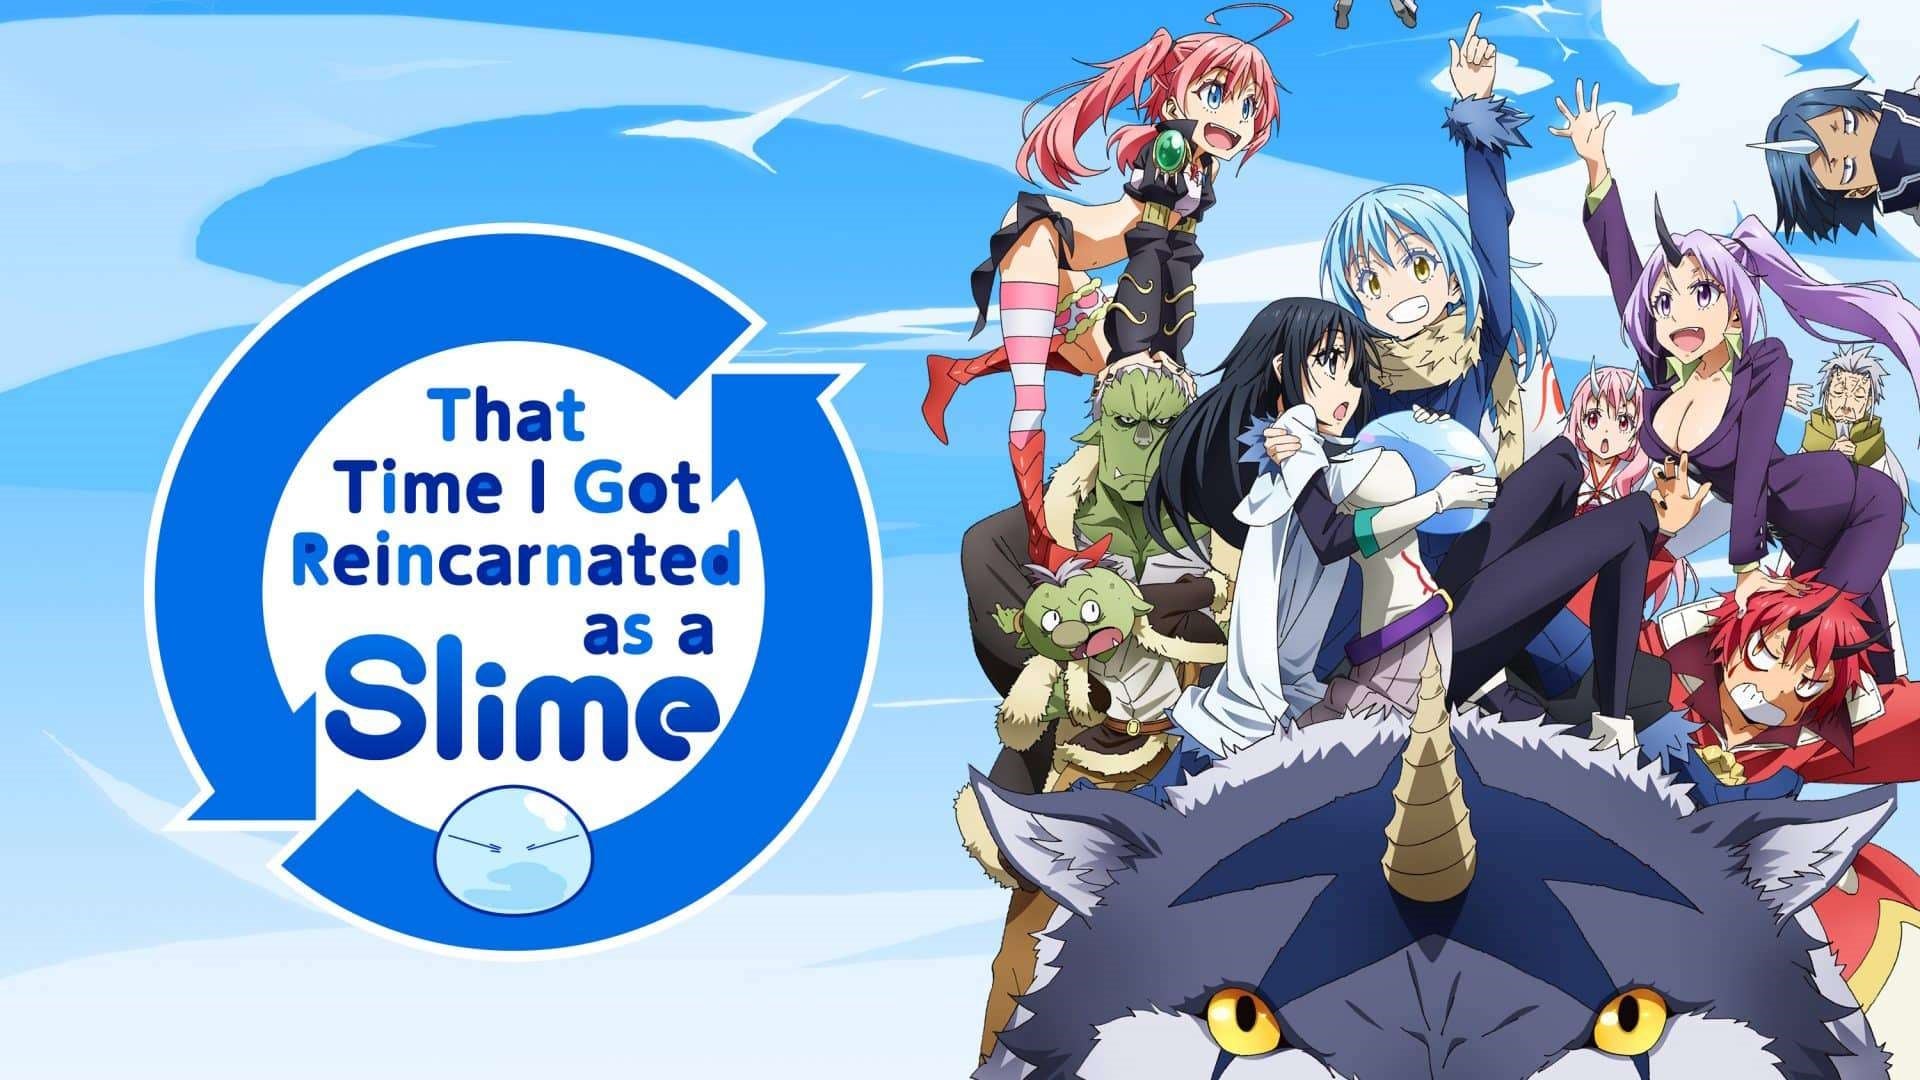 That Time I Got Reincarnated as a Slime: Season One Part 1